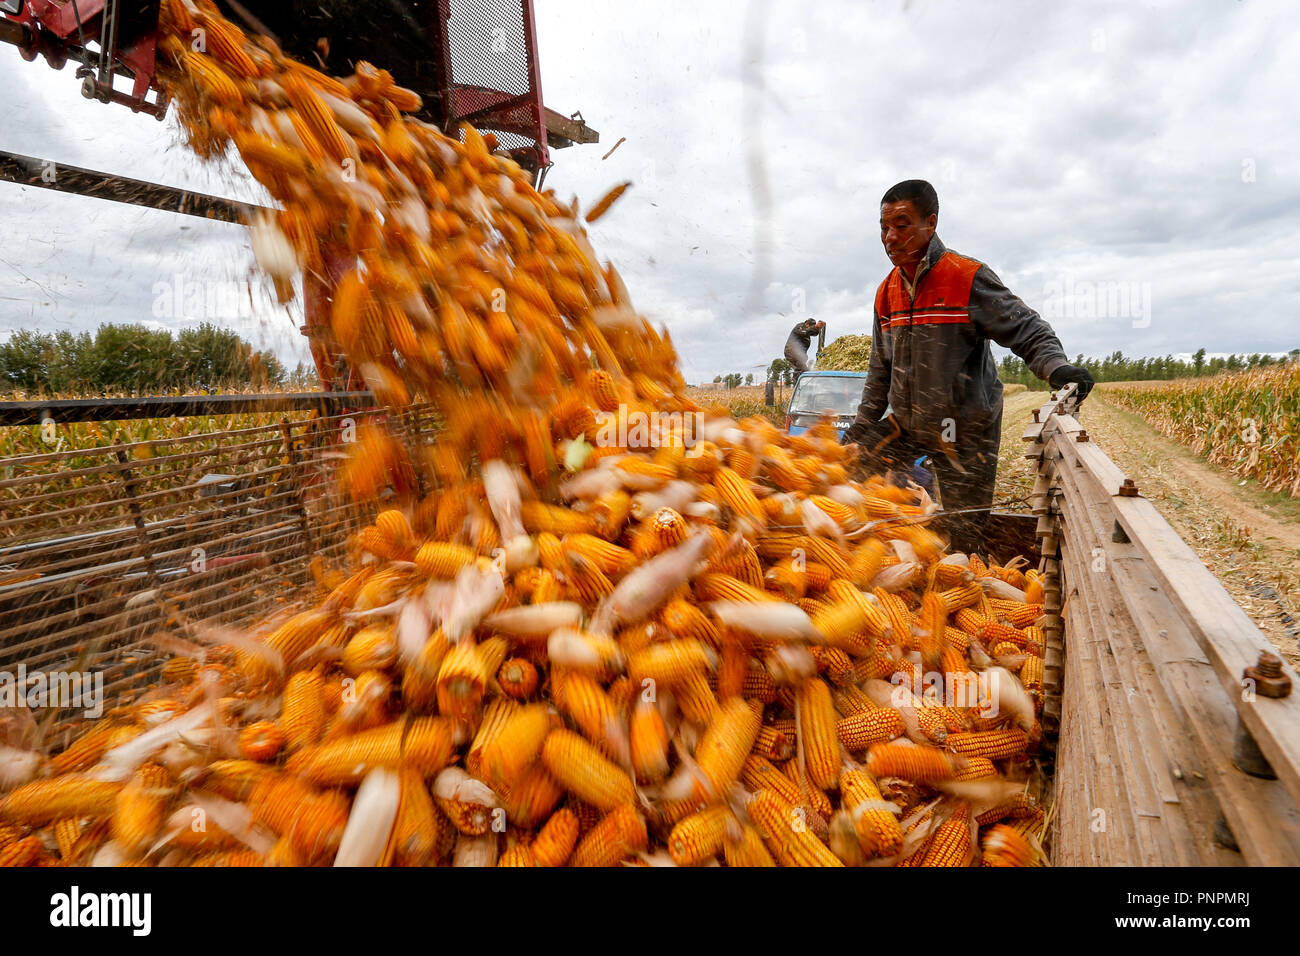 Aohan Banner. 22nd Sep, 2018. A villager loads harvested corn ears onto a truck in Beisanjia Village of Aohan Banner in north China's Inner Mongolia Autonomous Region, Sept. 22, 2018. China will mark its first Farmers' Harvest Festival on Sept. 23 this year. From 2018 on, the festival, to be celebrated on the Autumnal Equinox each year, is set to be observed annually to greet the harvest season and honour the agricultural workers. Credit: Yu Dongsheng/Xinhua/Alamy Live News Stock Photo